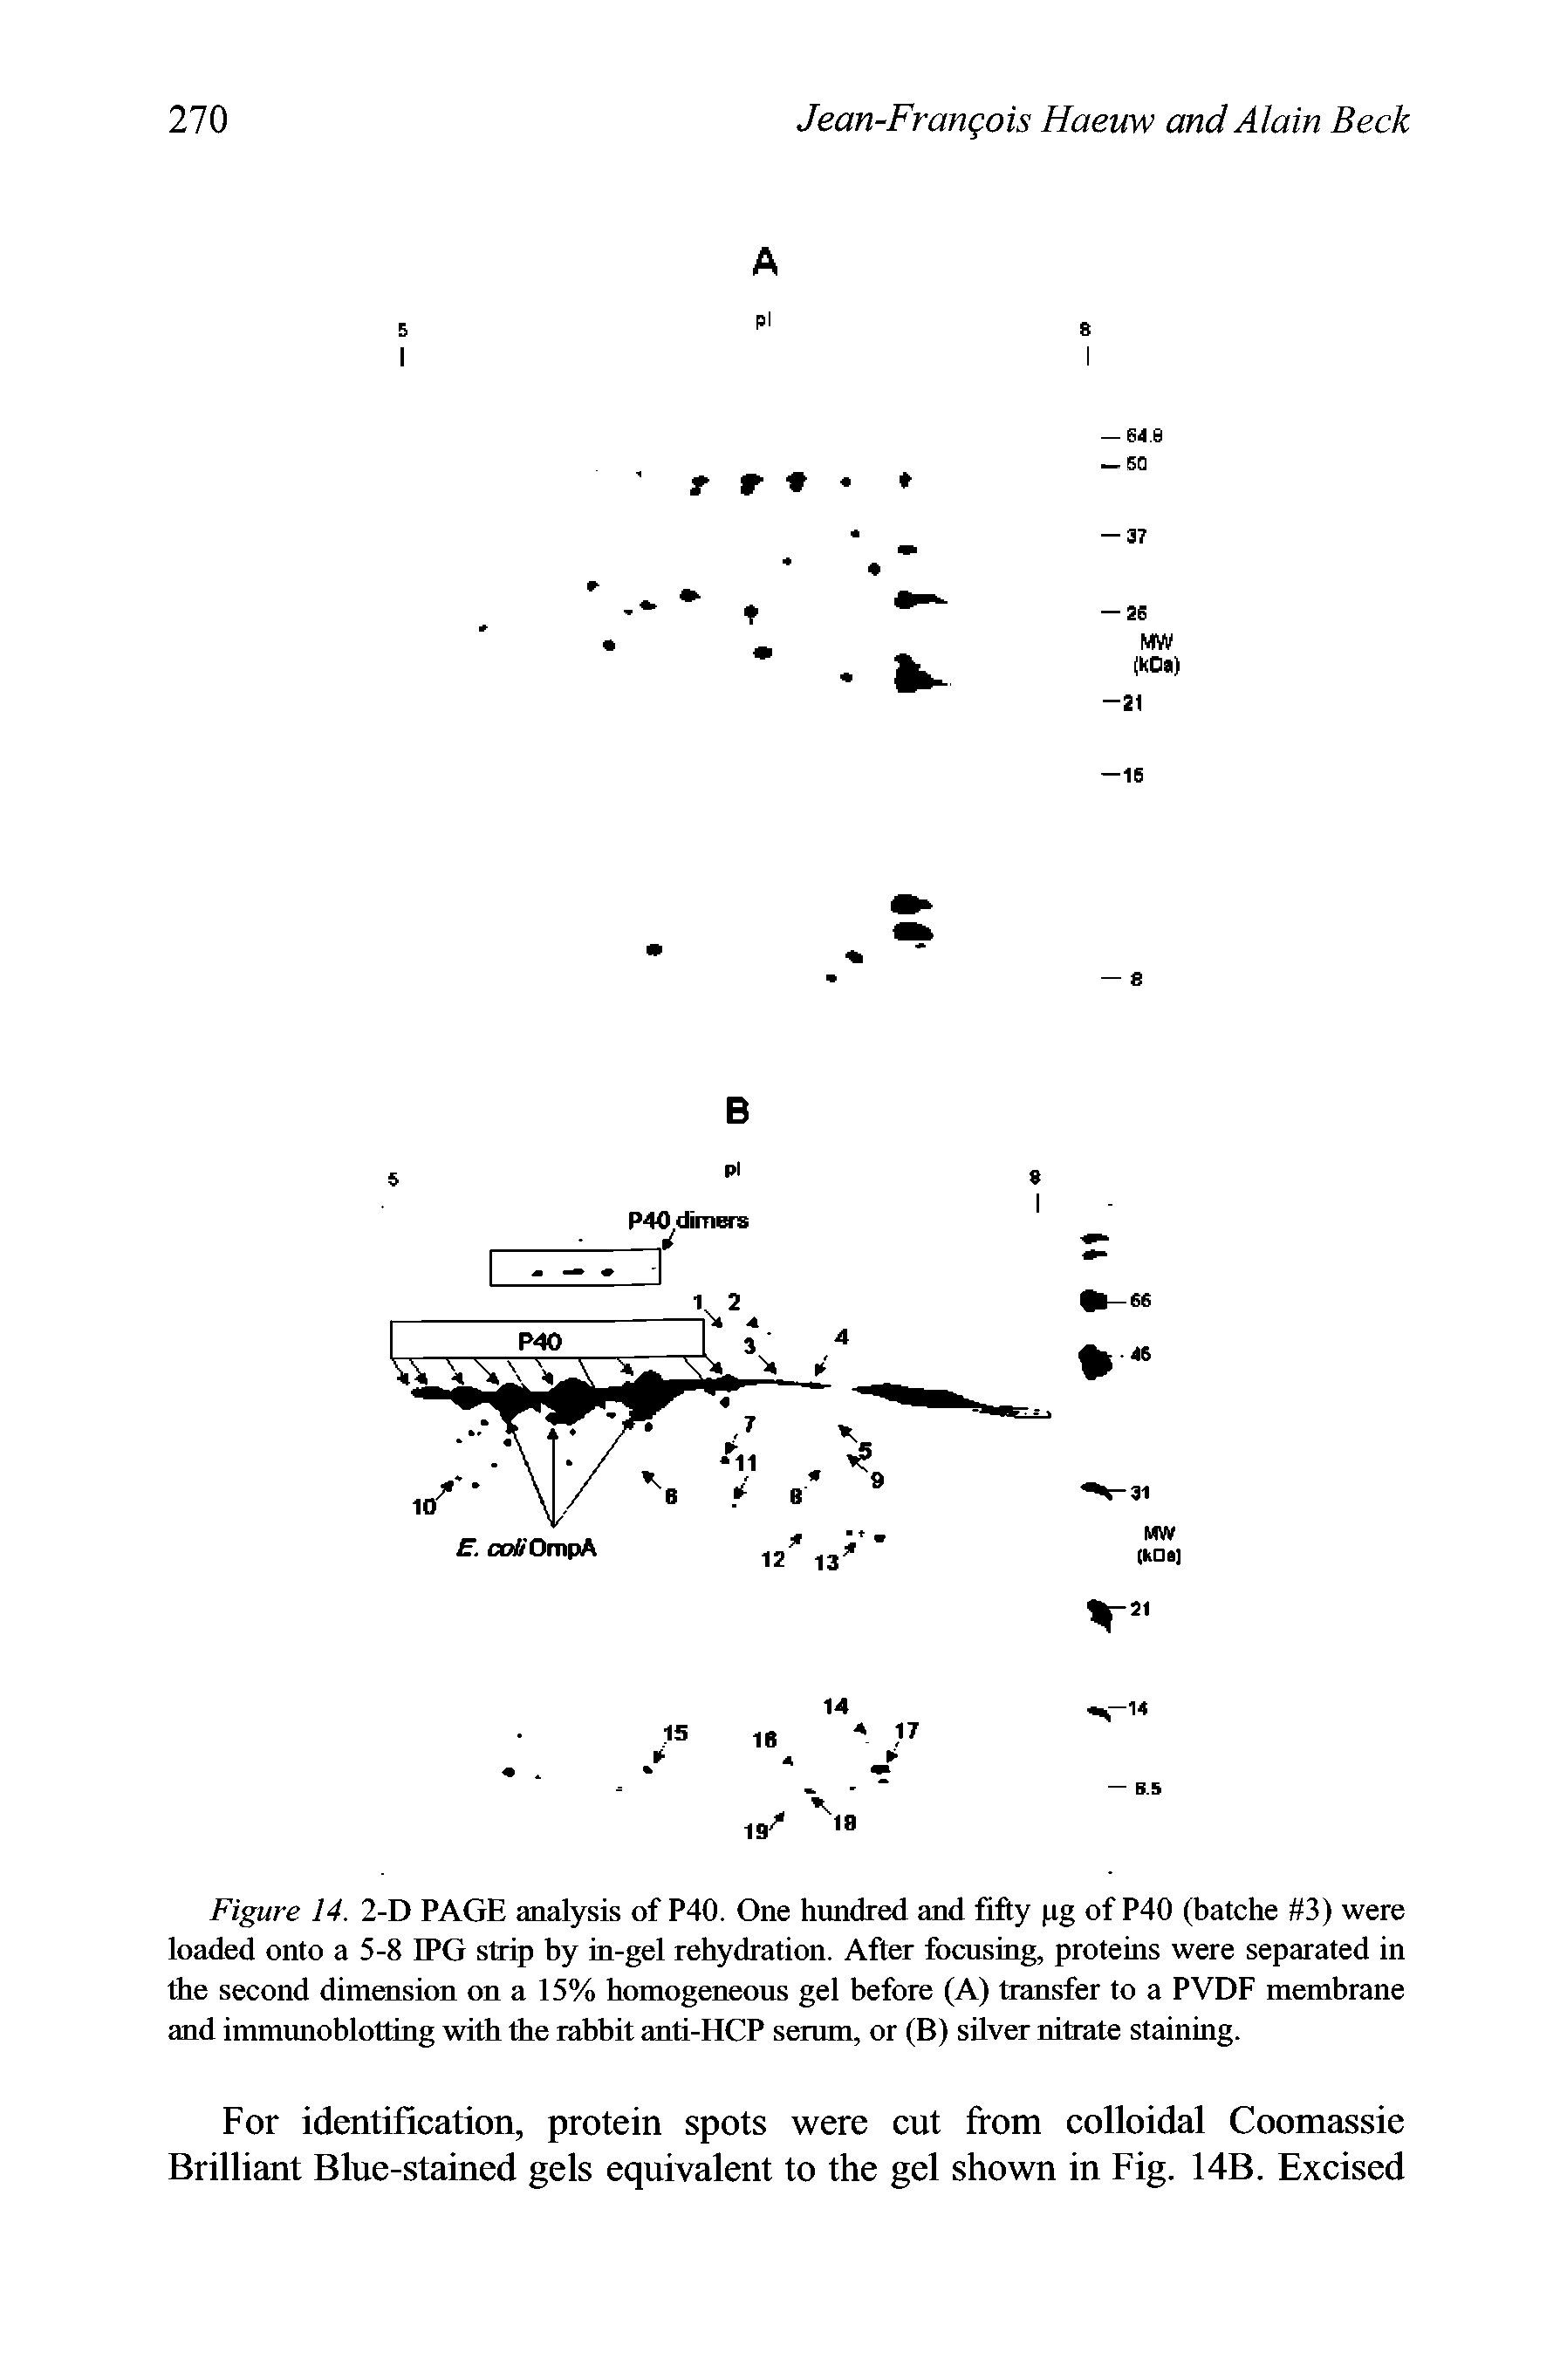 Figure 14. 2-D PAGE analysis of P40. One hundred and fifty rg of P40 (batche 3) were loaded onto a 5-8 IPG strip by in-gel rehydration. After focusing, proteins were separated in the second dimension on a 15% homogeneous gel before (A) transfer to a PVDF membrane and immunoblotting with the rabbit anti-HCP serum, or (B) silver nitrate staining.